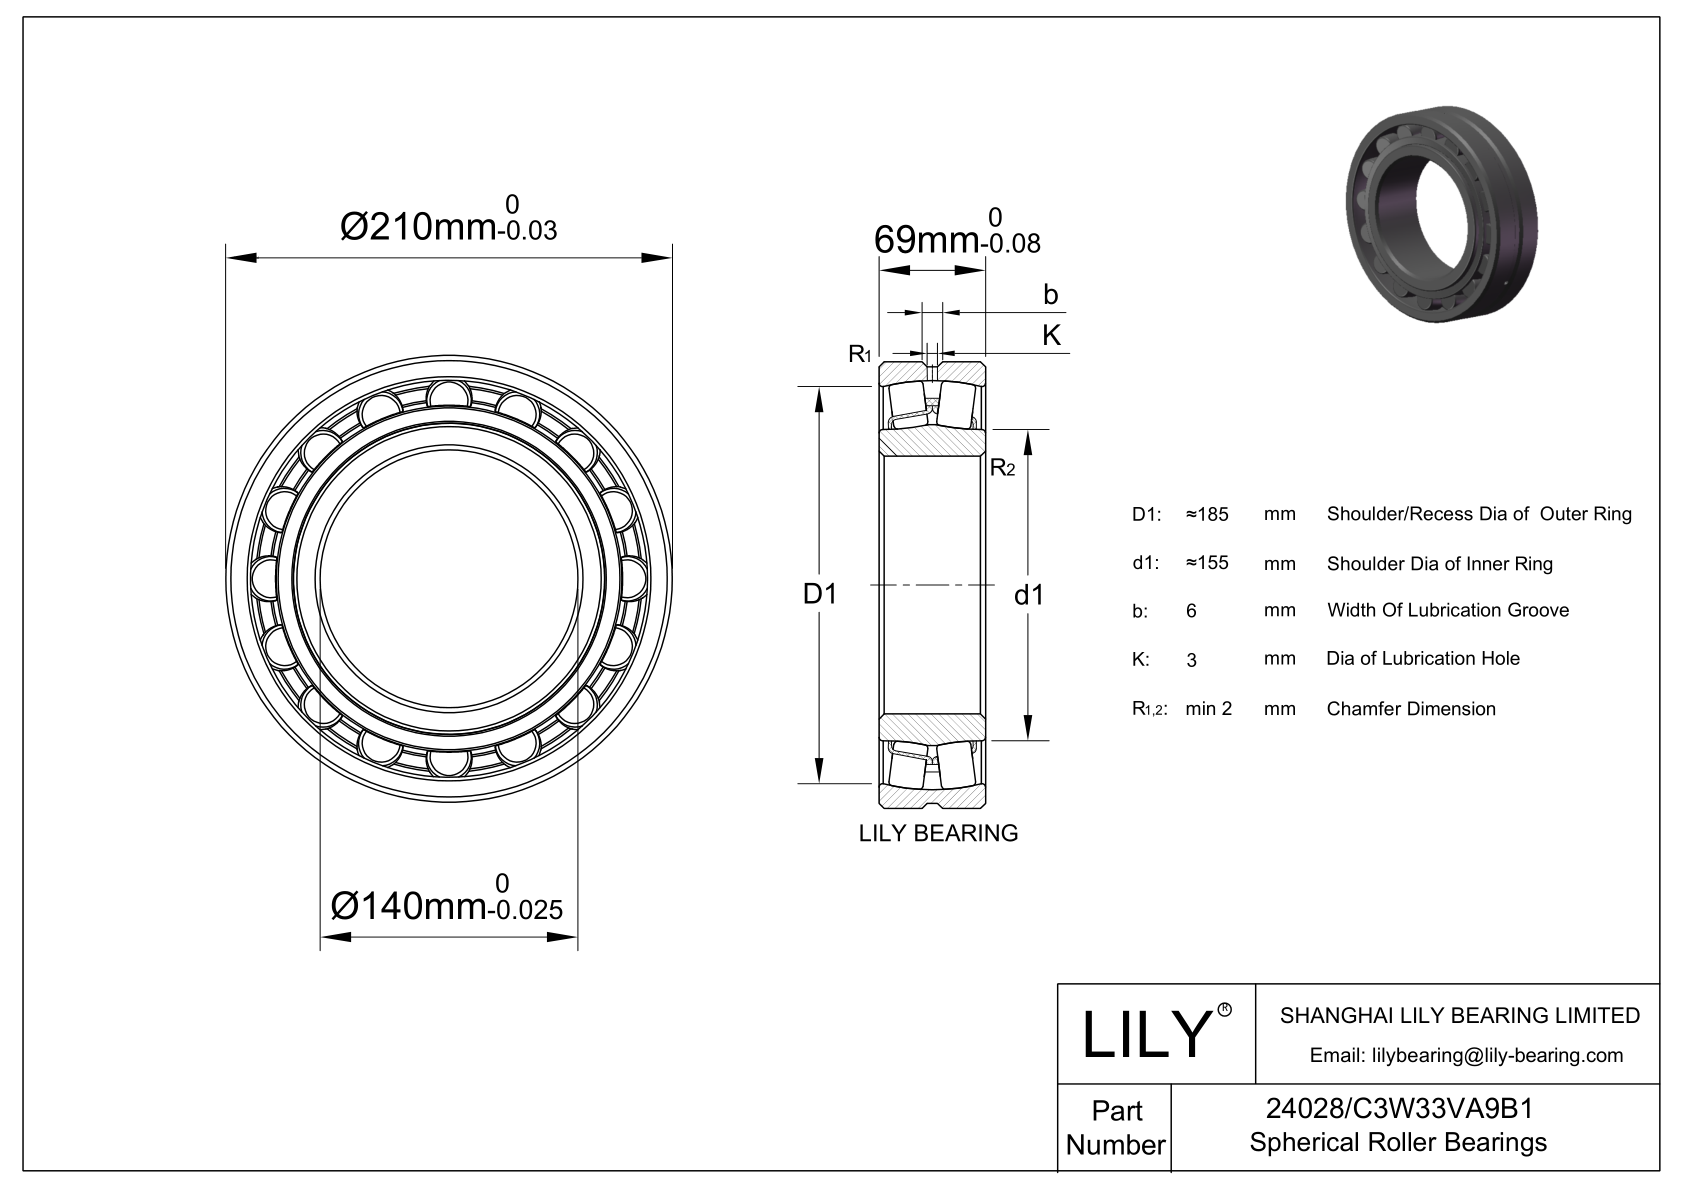 24028/C3W33VA9B1 Double Row Spherical Roller Bearing cad drawing